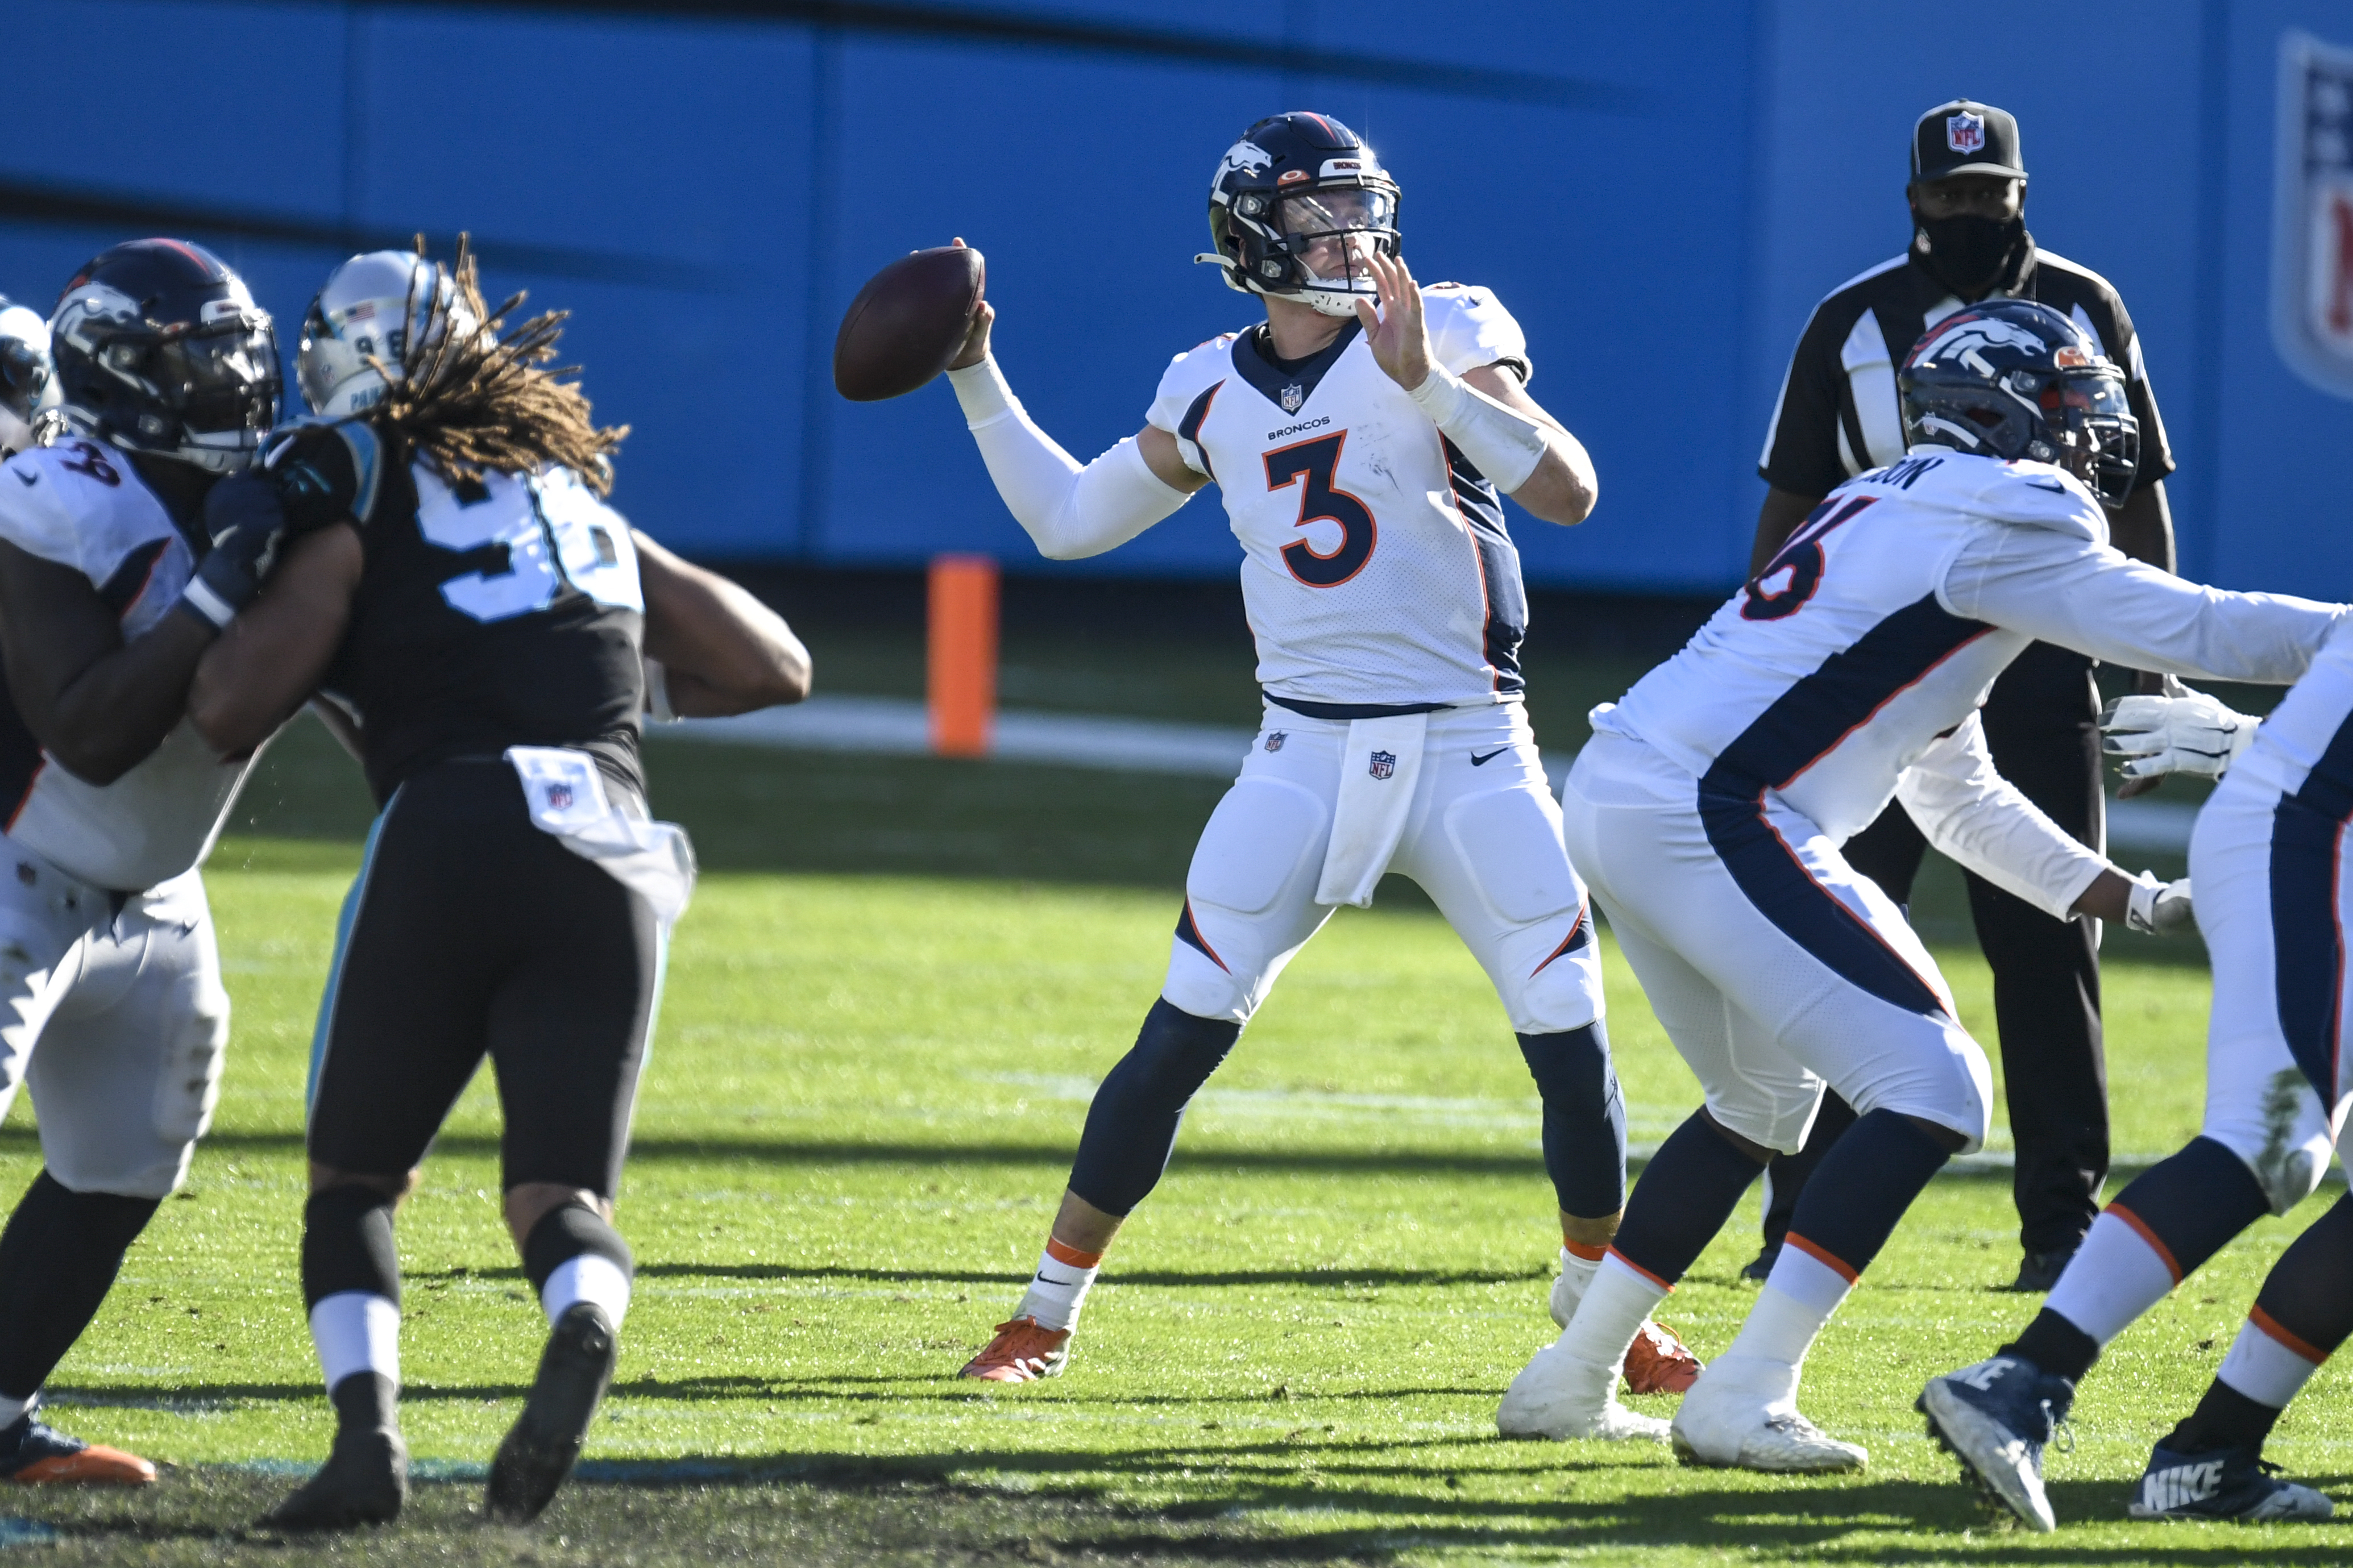 Drew Lock of the Denver Broncos throws against the Carolina Panthers at Bank of America Stadium on Dec. 13, 2020.